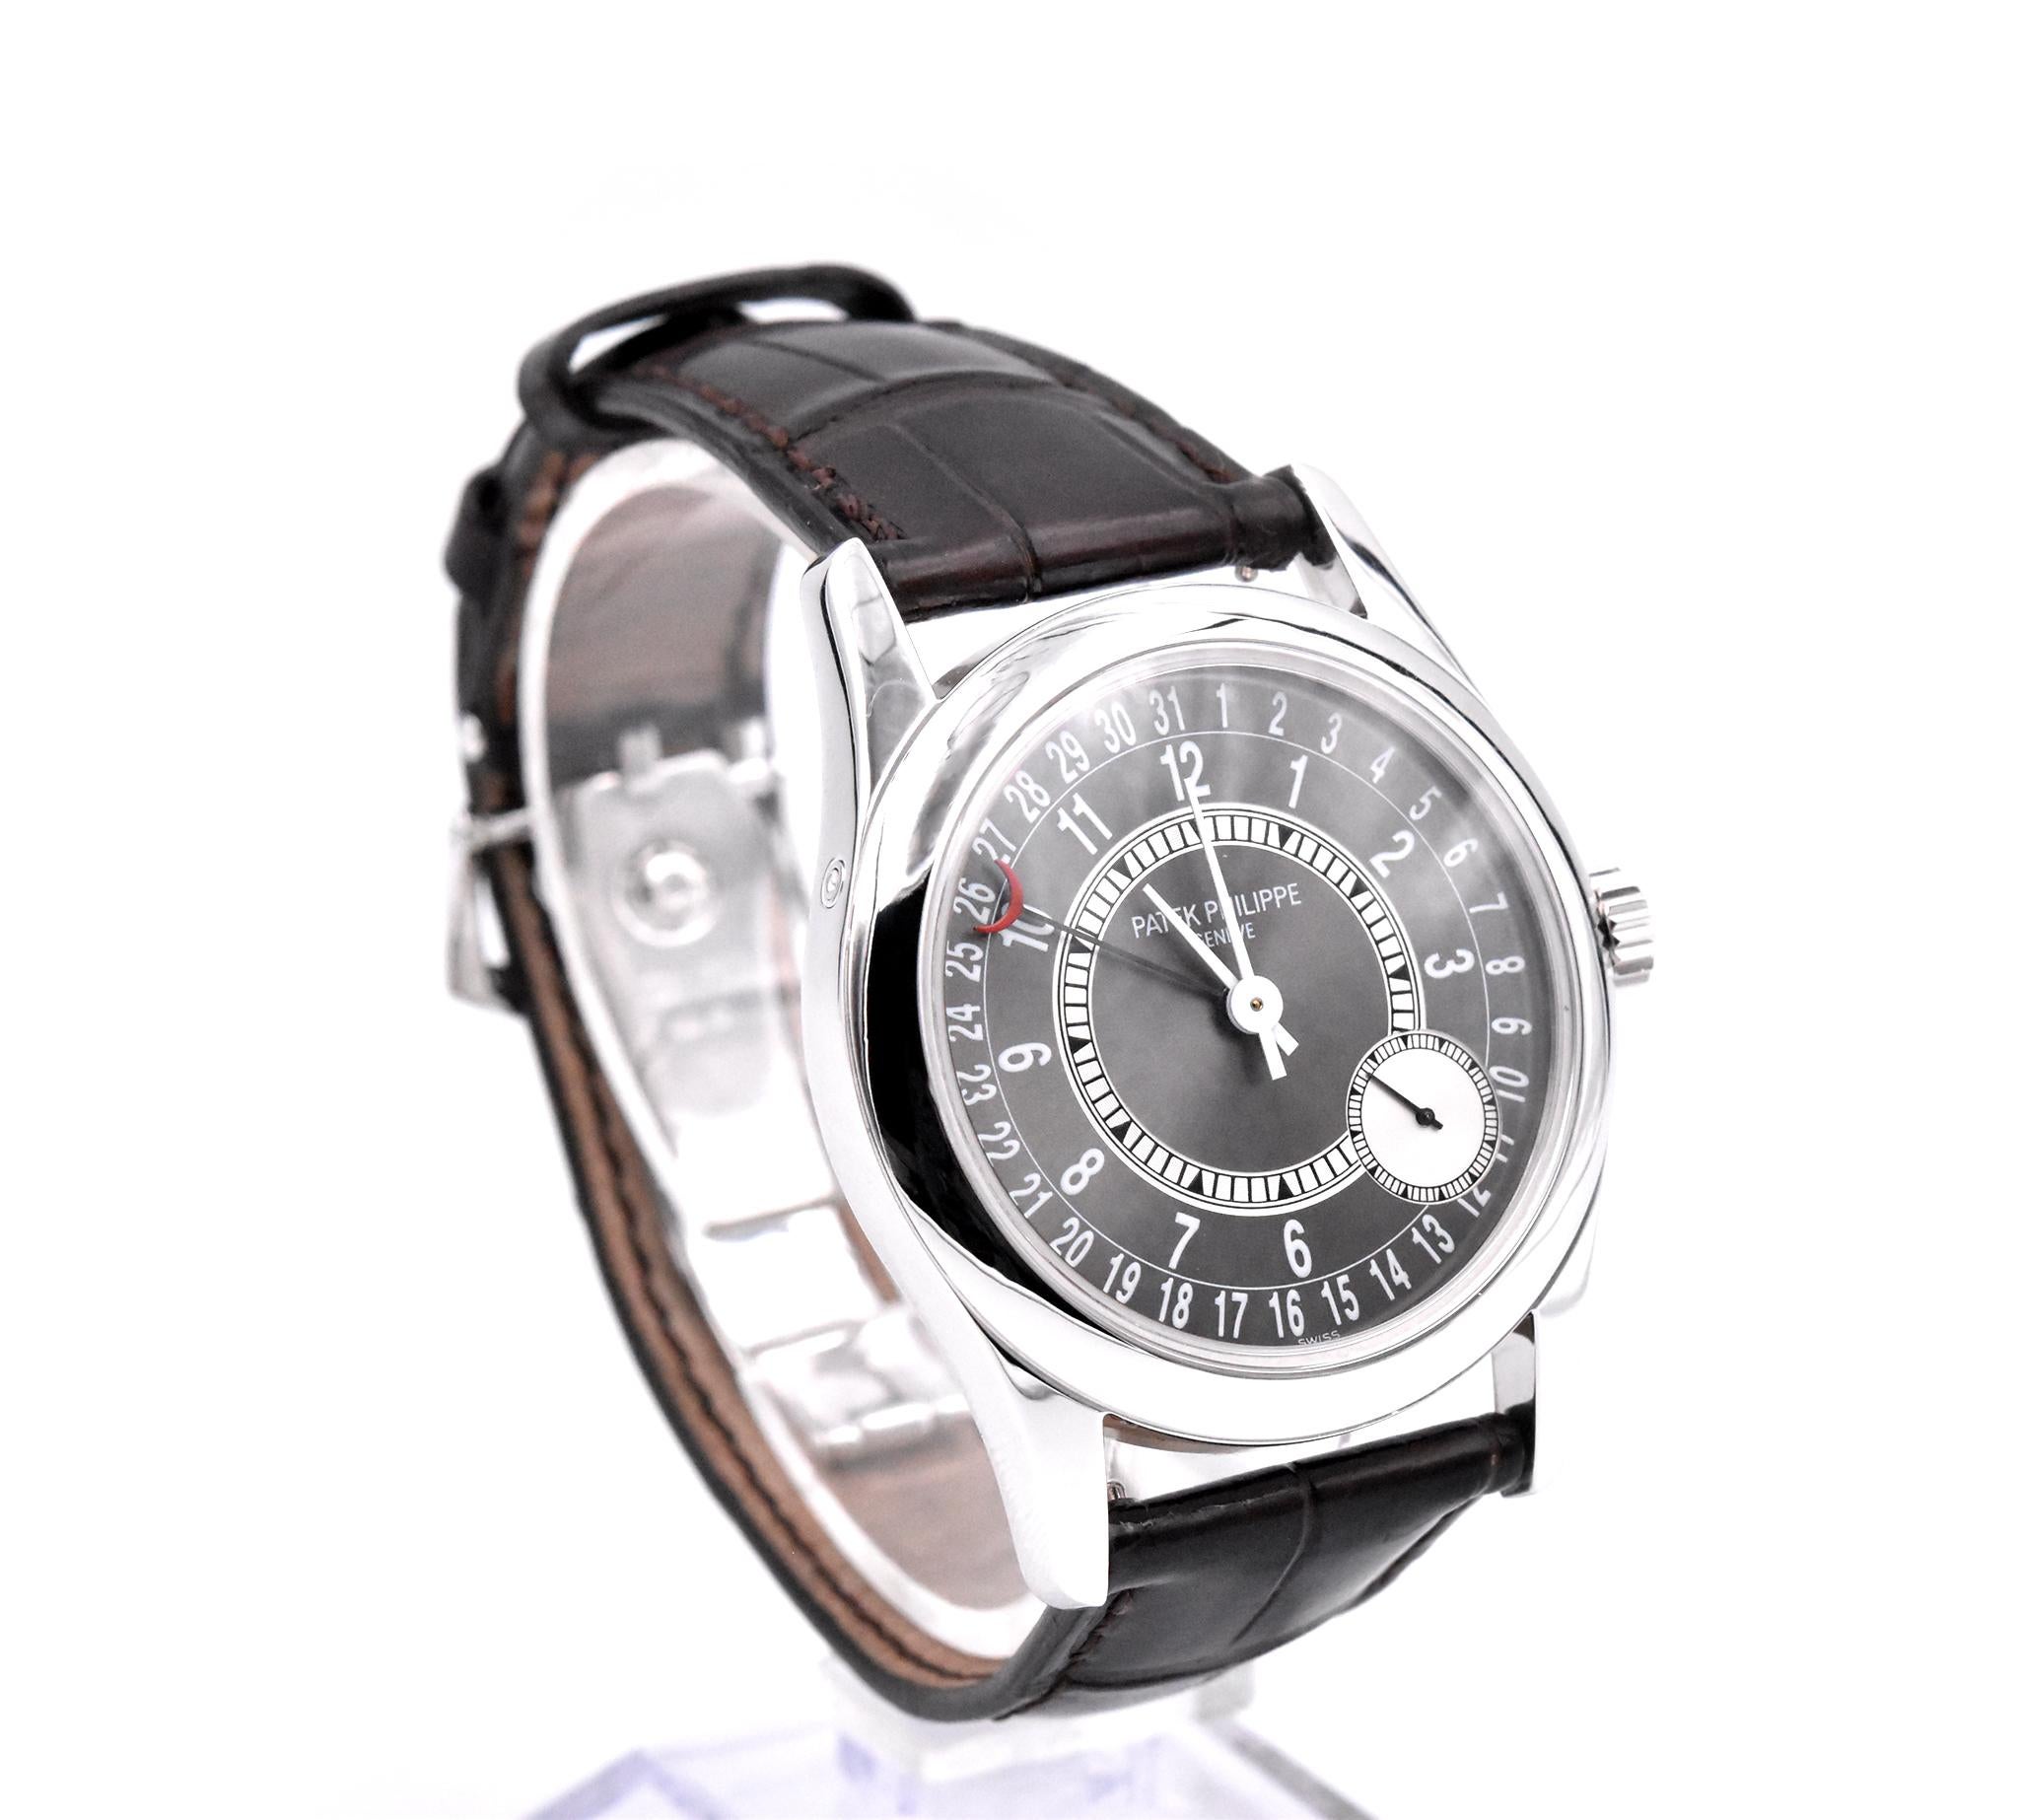 Movement: automatic caliber 240/166
Function: hours, minutes, seconds, date
Case: 37mm white gold case, sapphire protective crystal, push/pull crown
Dial: grey dial with large red crescent hand for date, offset small seconds sub-dial
Band: factory